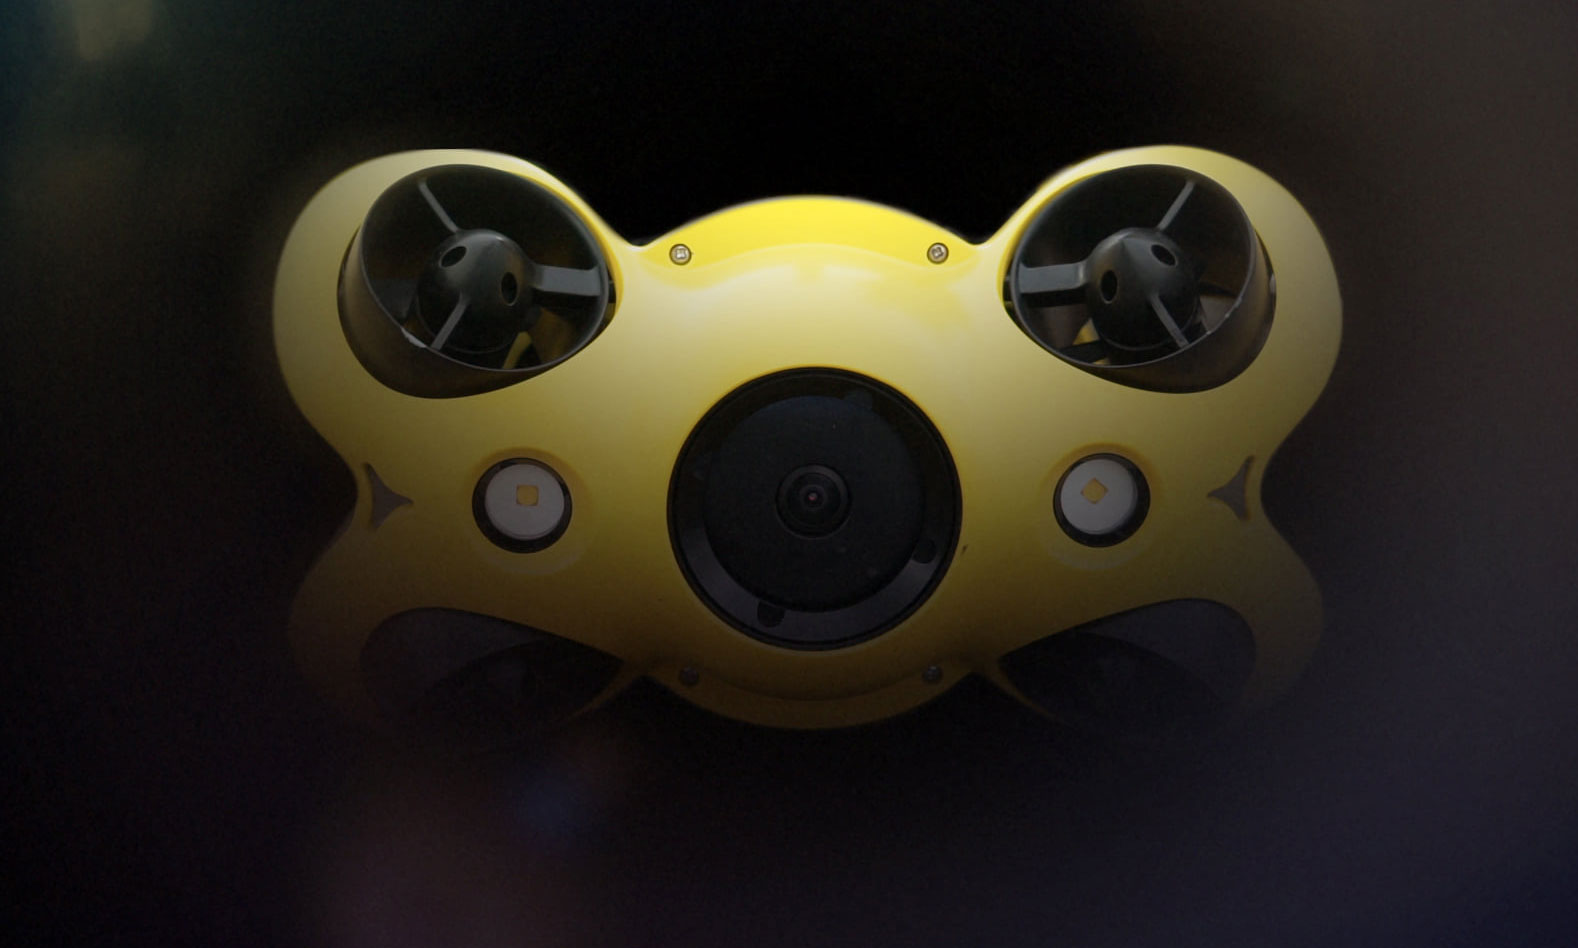 chasing-innovations-new-underwater-drone-2020-ces.jpg